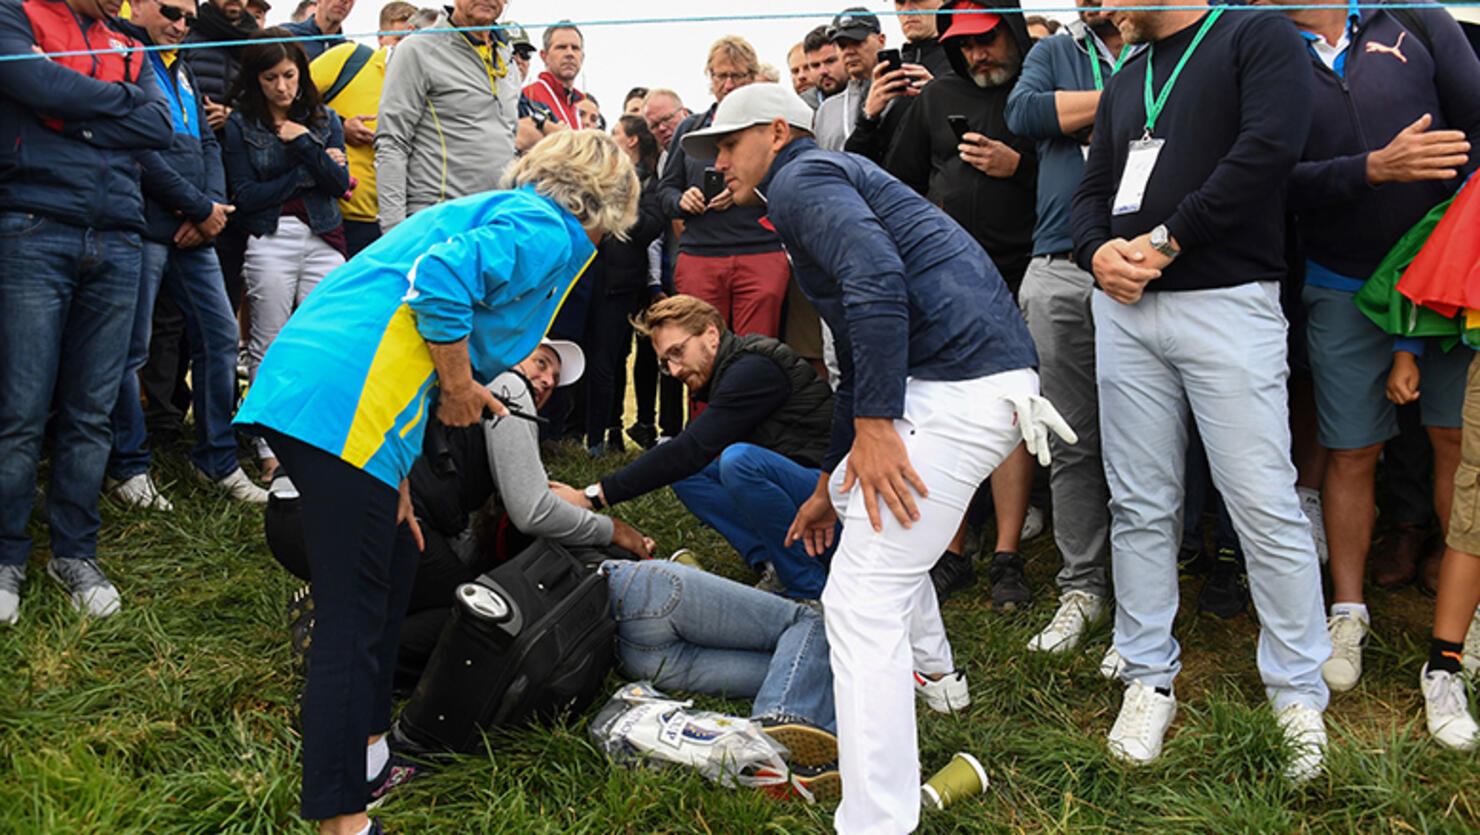 US golfer Brooks Koepka (R) reacts next to an injured spectator who fell during the fourball match on the first day of the 42nd Ryder Cup at Le Golf National Course at Saint-Quentin-en-Yvelines